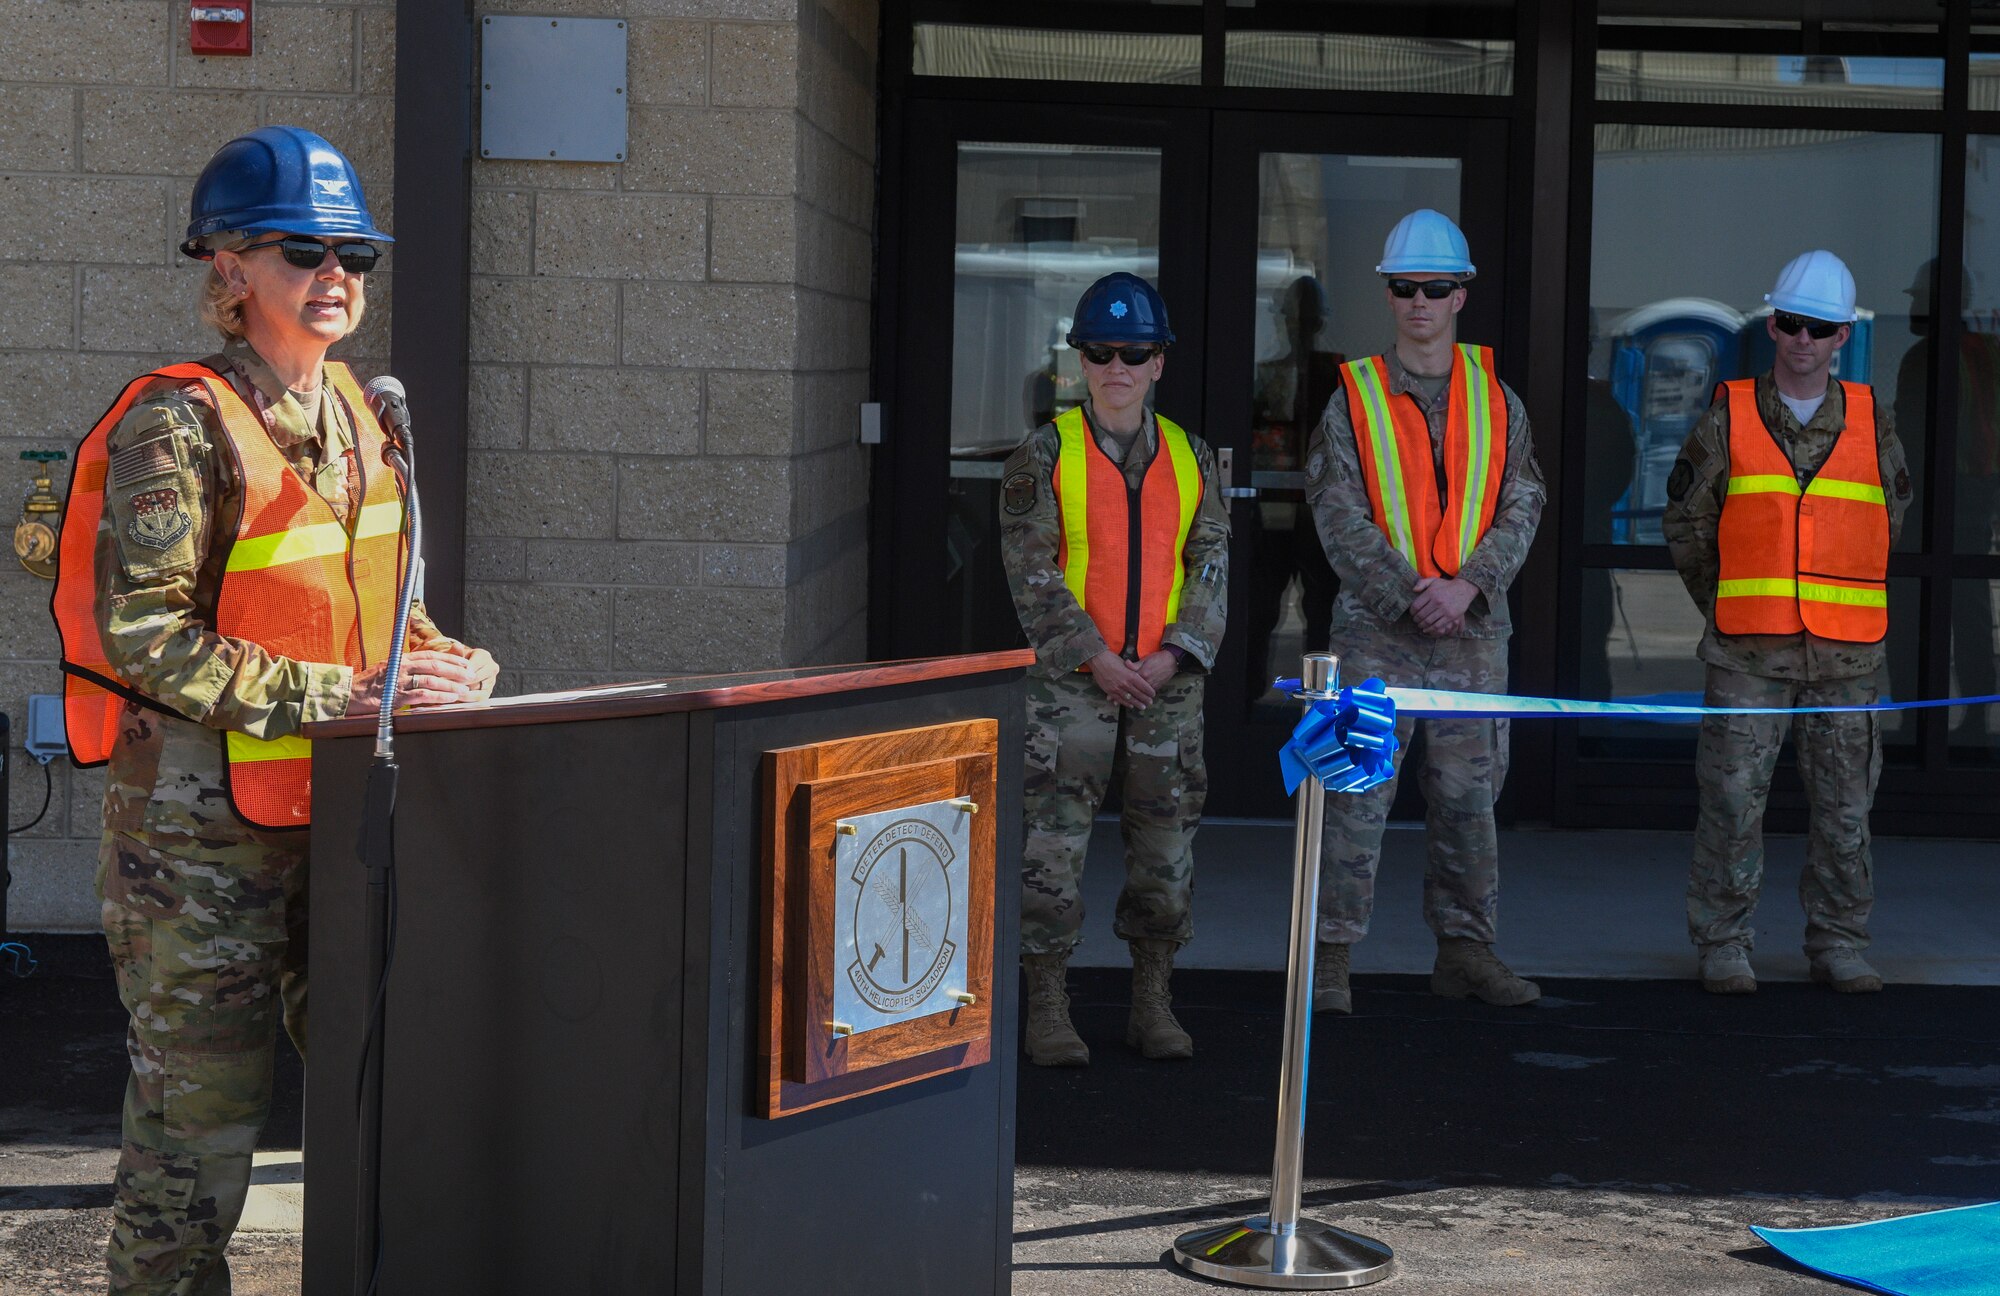 Col. Jennifer Reeves, 341st Missile Wing commander, makes opening remarks during a ribbon-cutting ceremony for the new Tactical Response Force/Helicopter Operations Alert Facility Aug. 4, 2020, at Malmstrom Air Force Base, Mont.